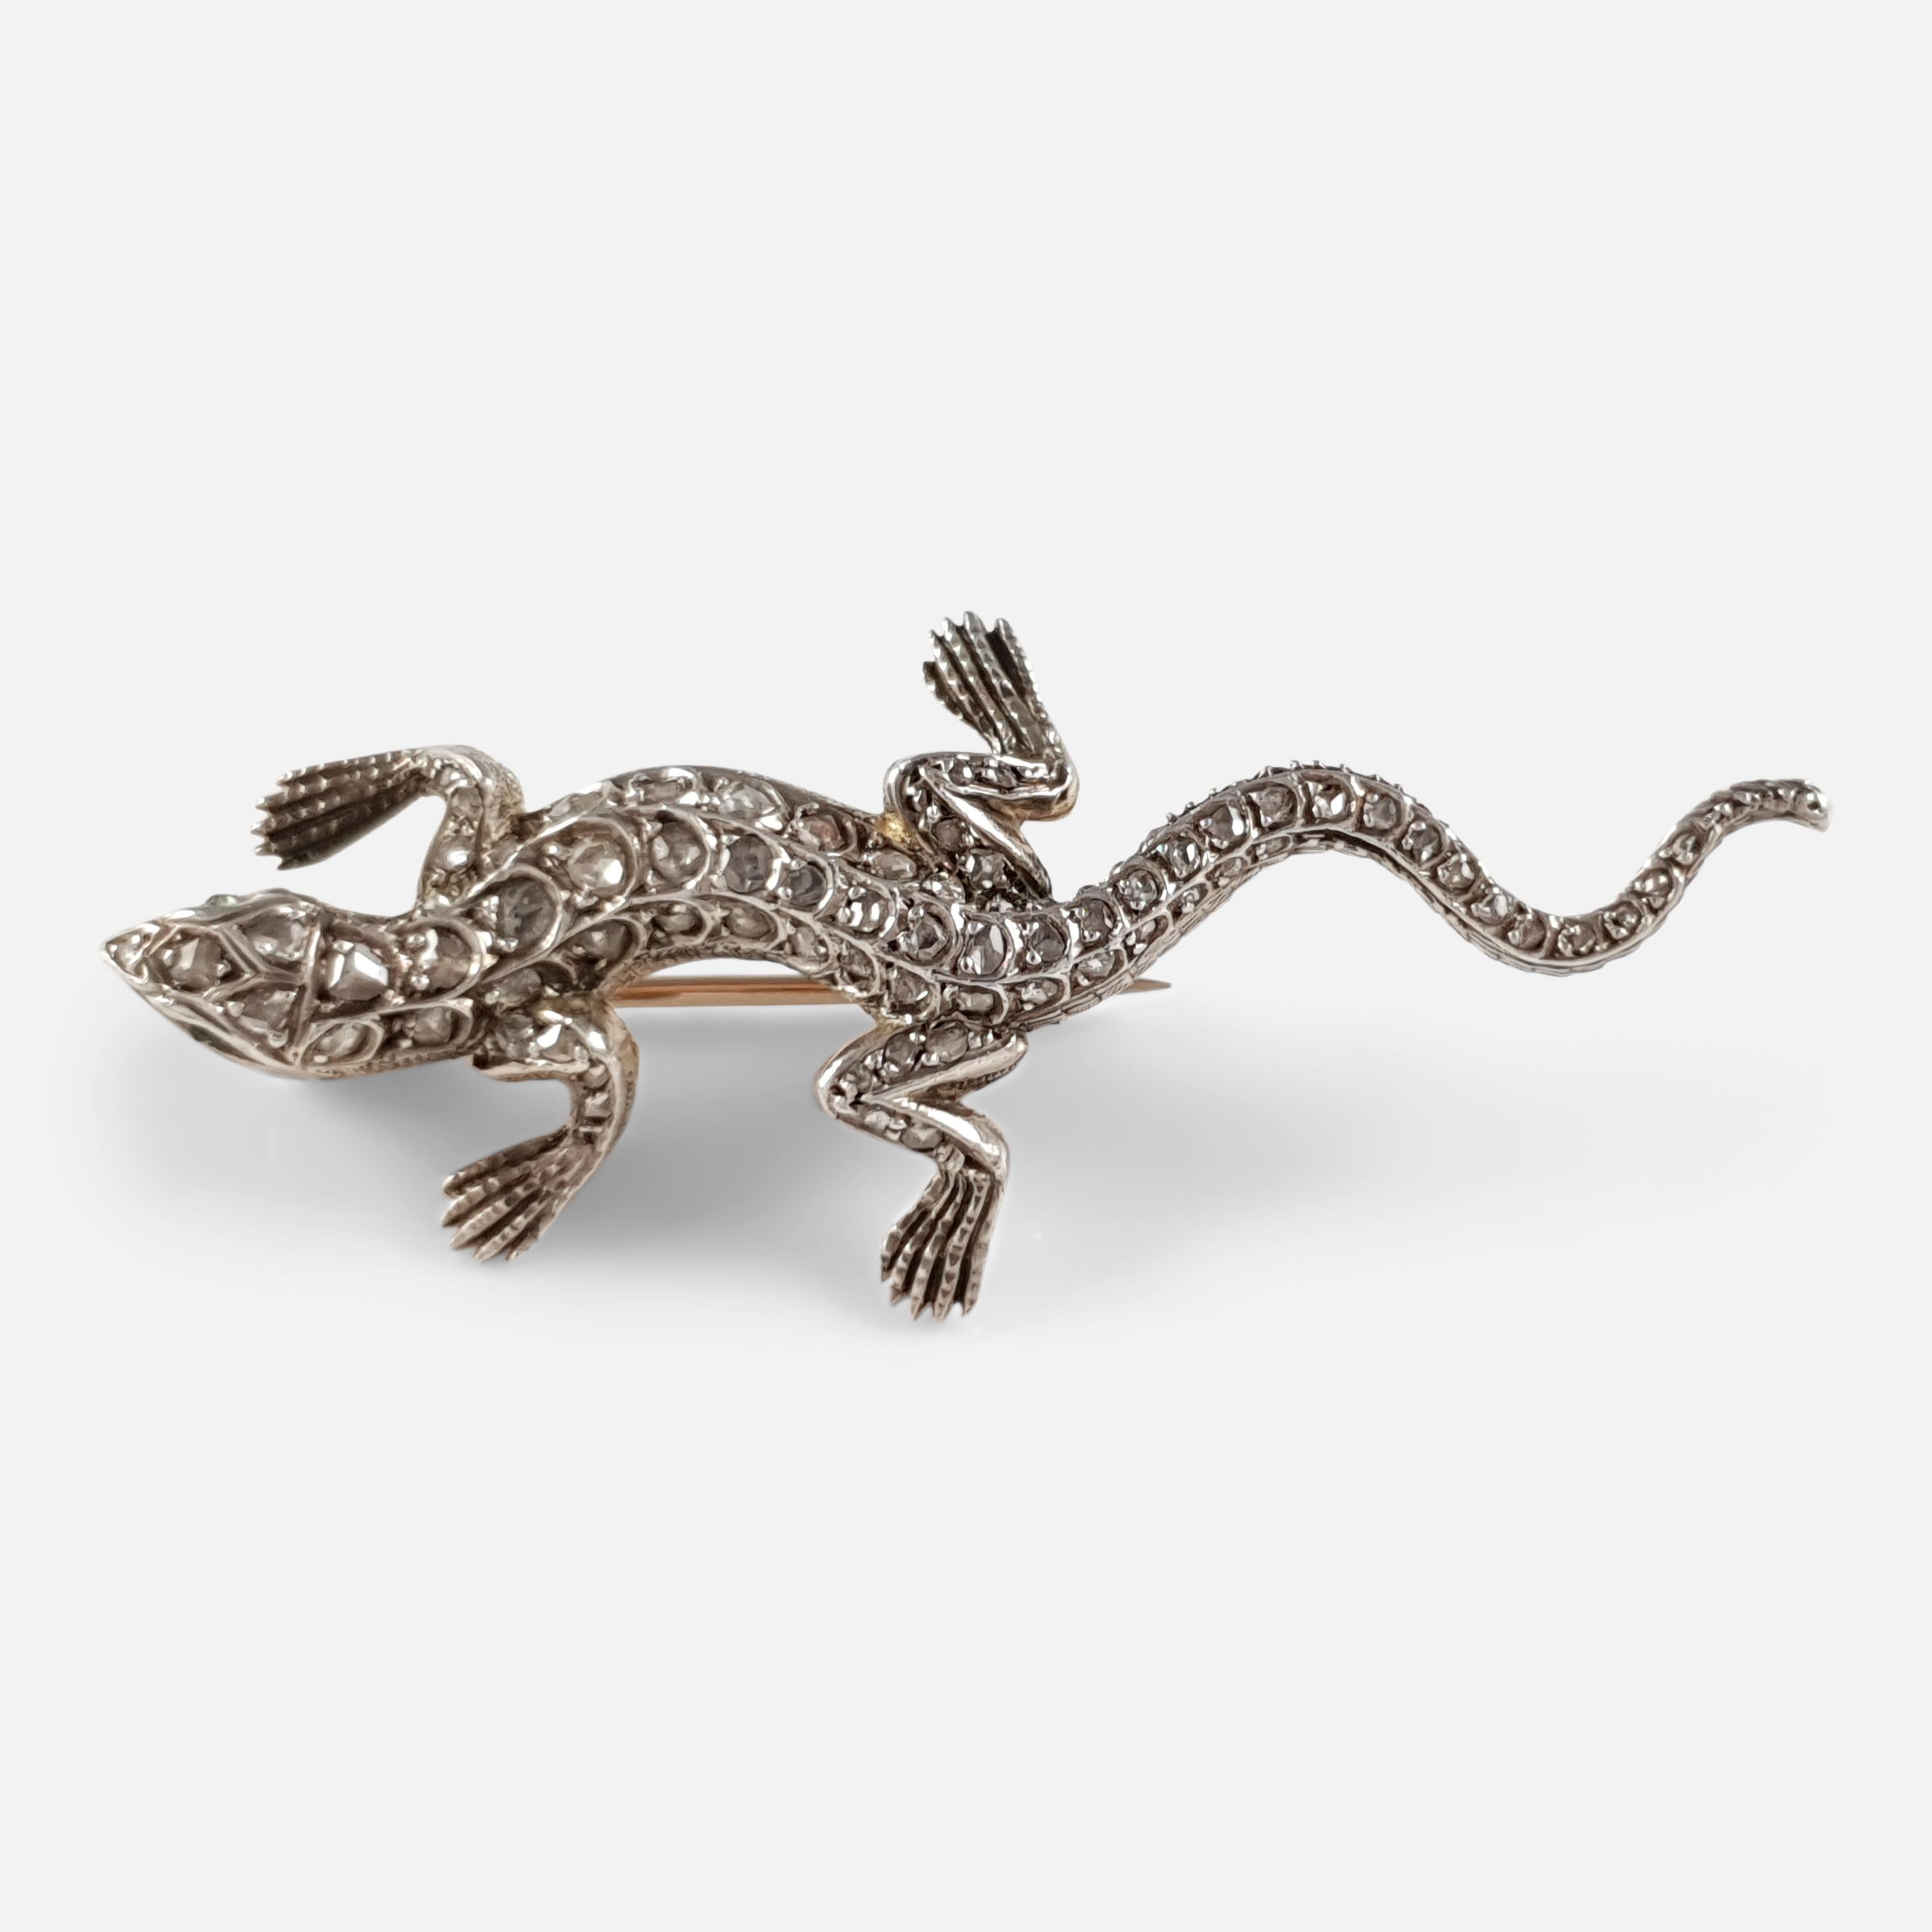 An emerald and diamond lizard brooch, circa 1895. The brooch is crafted in silver to the front and backed in rose gold; with rose cut emerald eyes, an engraved head, body, and tail that is highlighted with graduated rose-cut diamonds. The brooch is